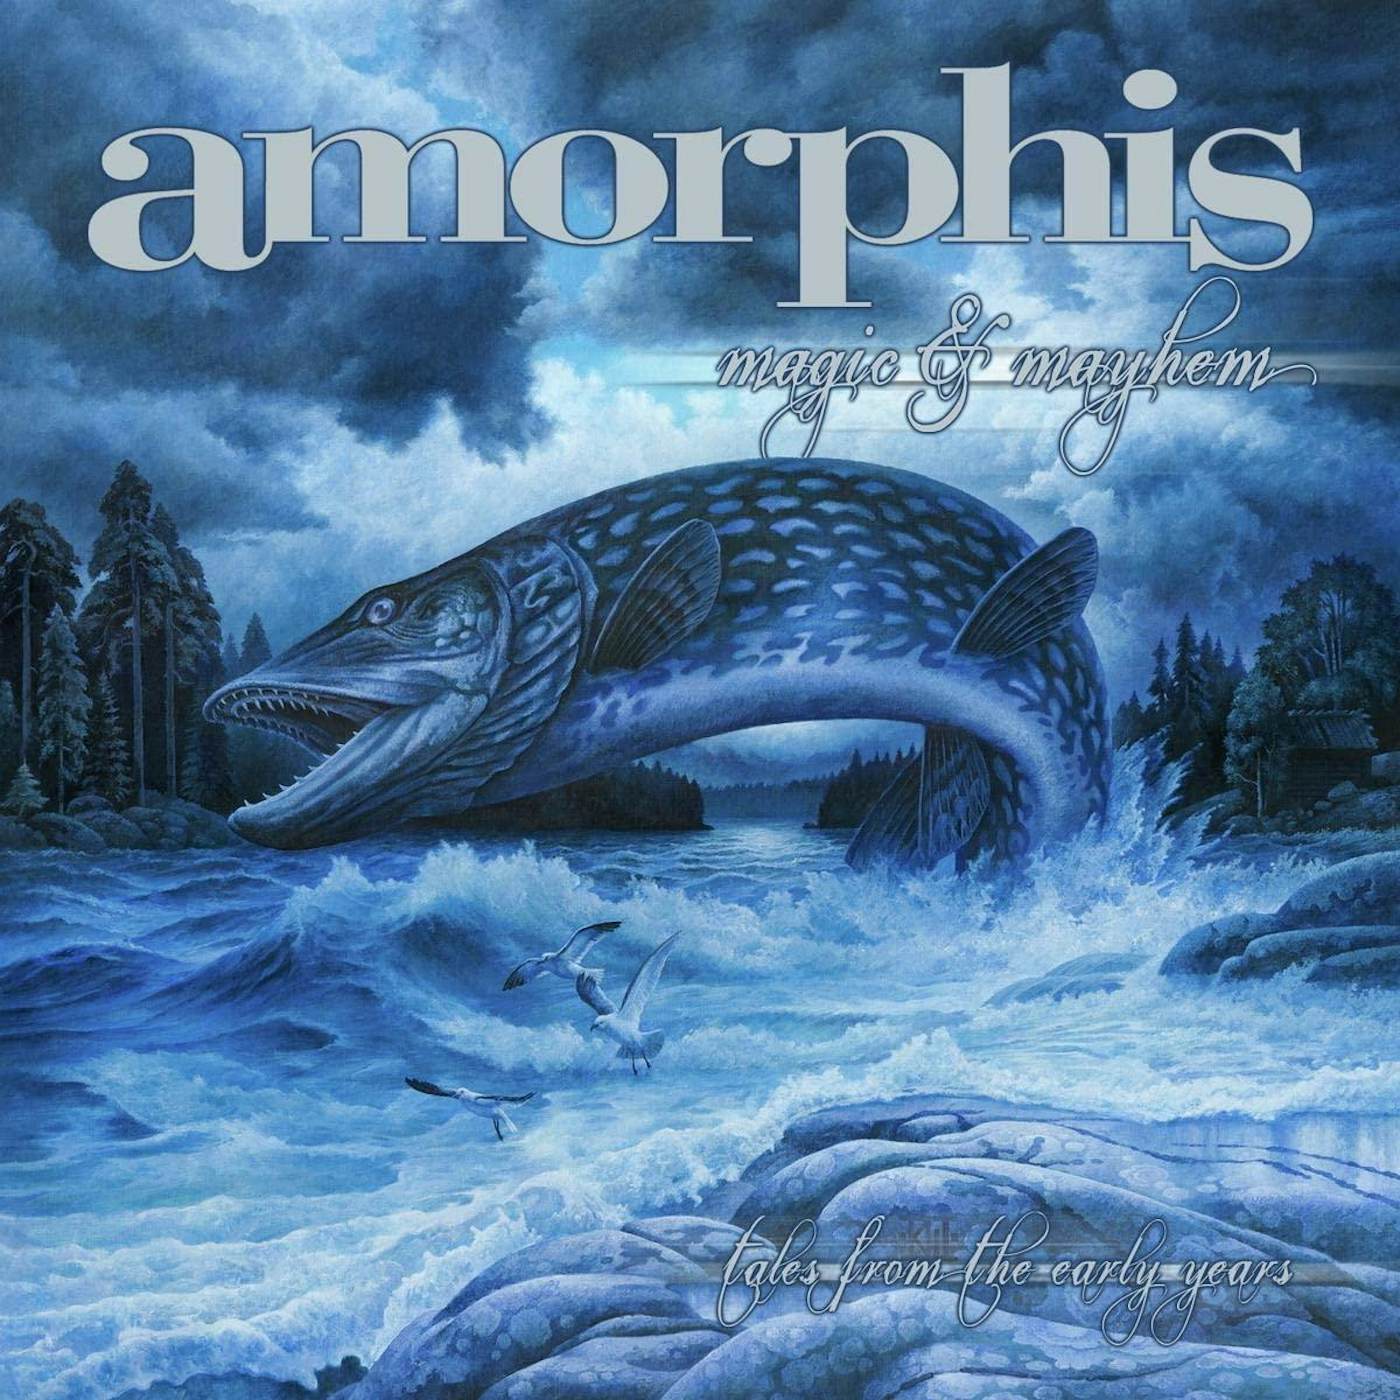 Amorphis Magic And Mayhem - Tales From The Early Years Vinyl Record